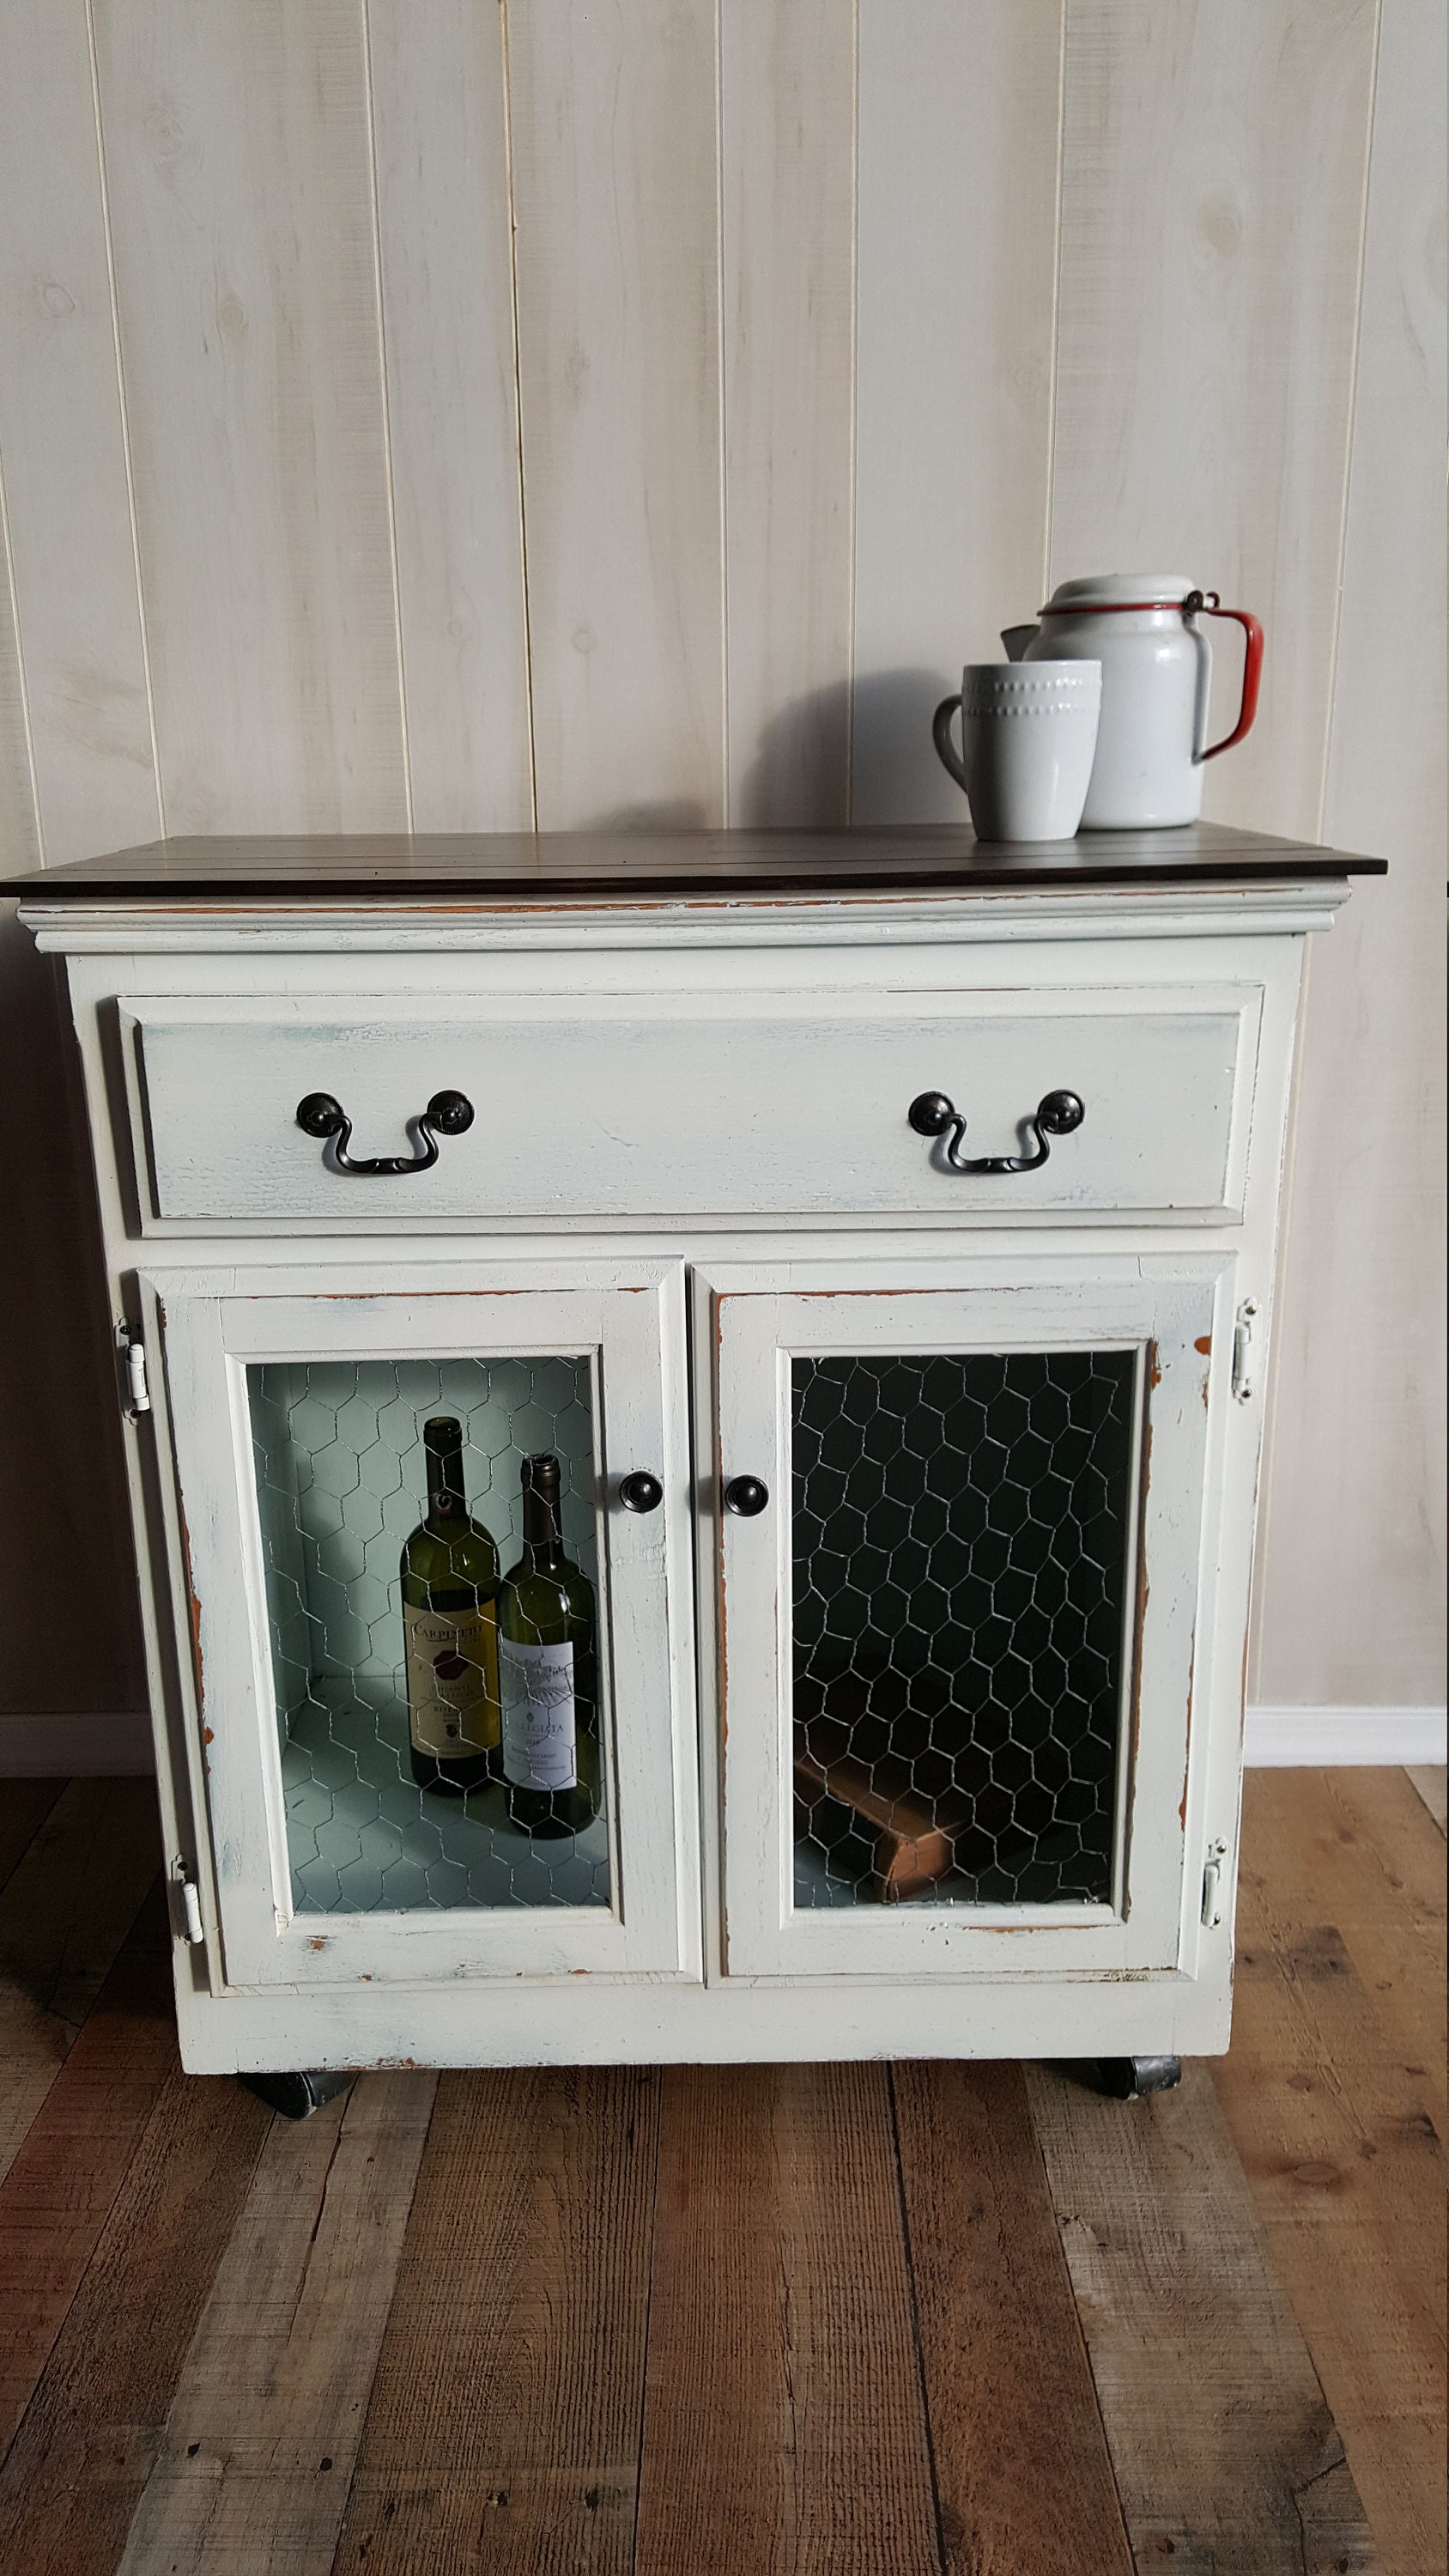 PICK UP ONLY, Vintage cabinet coffee bar, farmhouse storage cabinet